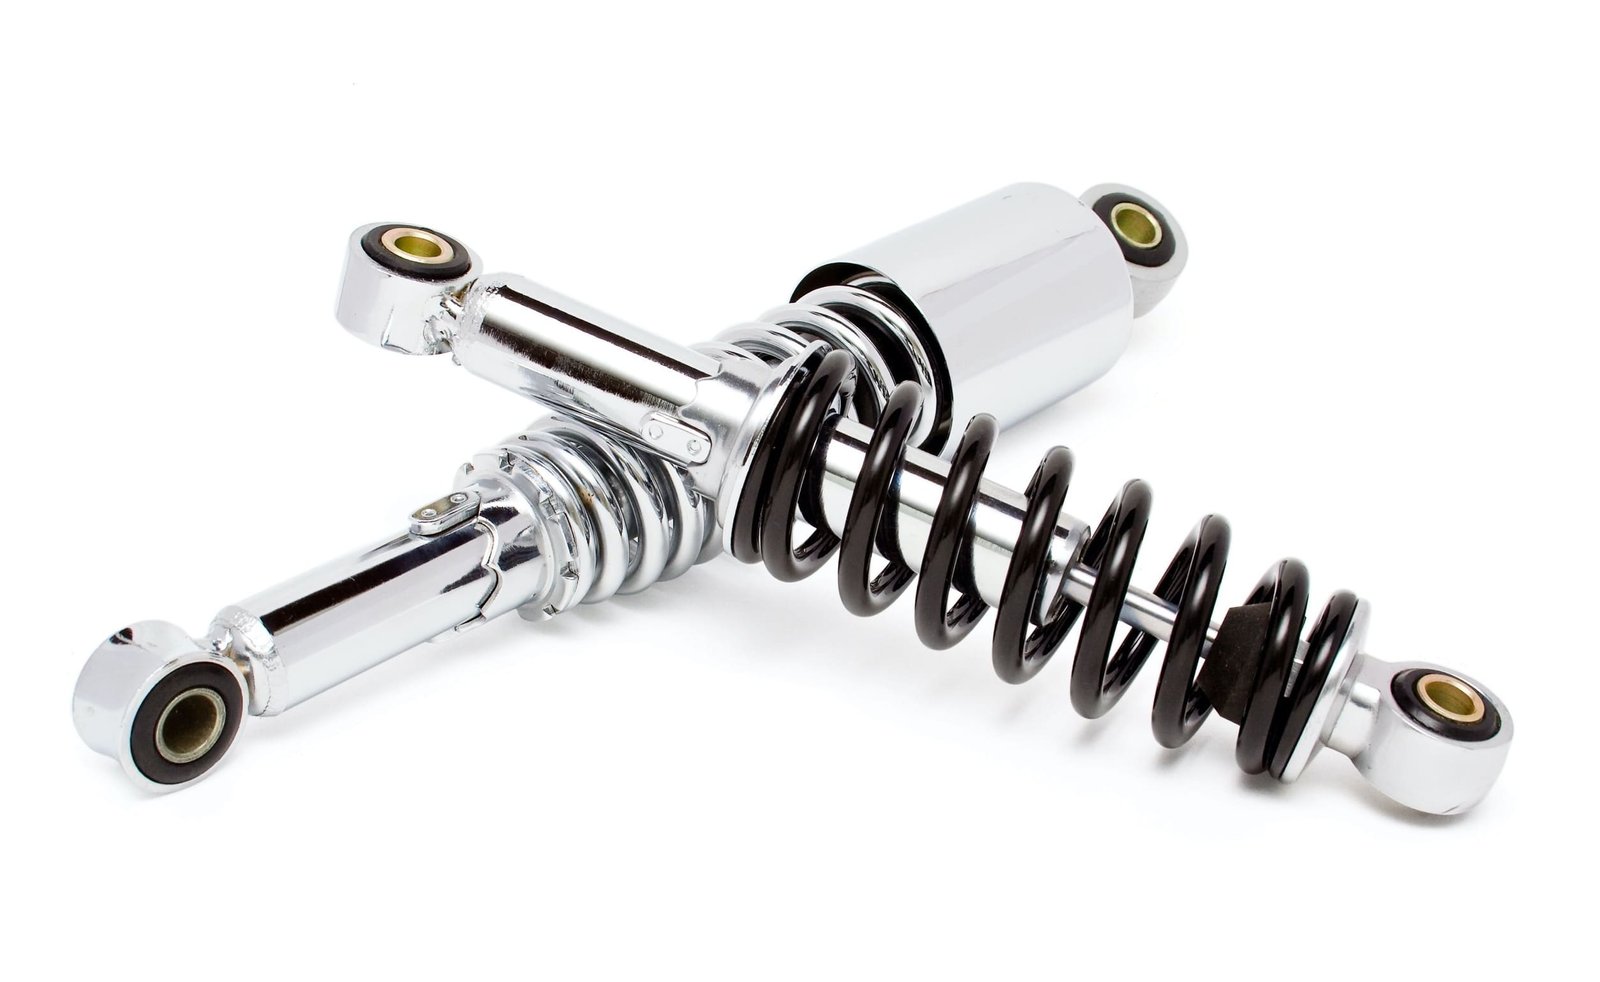 How much does shock absorber replacement cost in the UK?